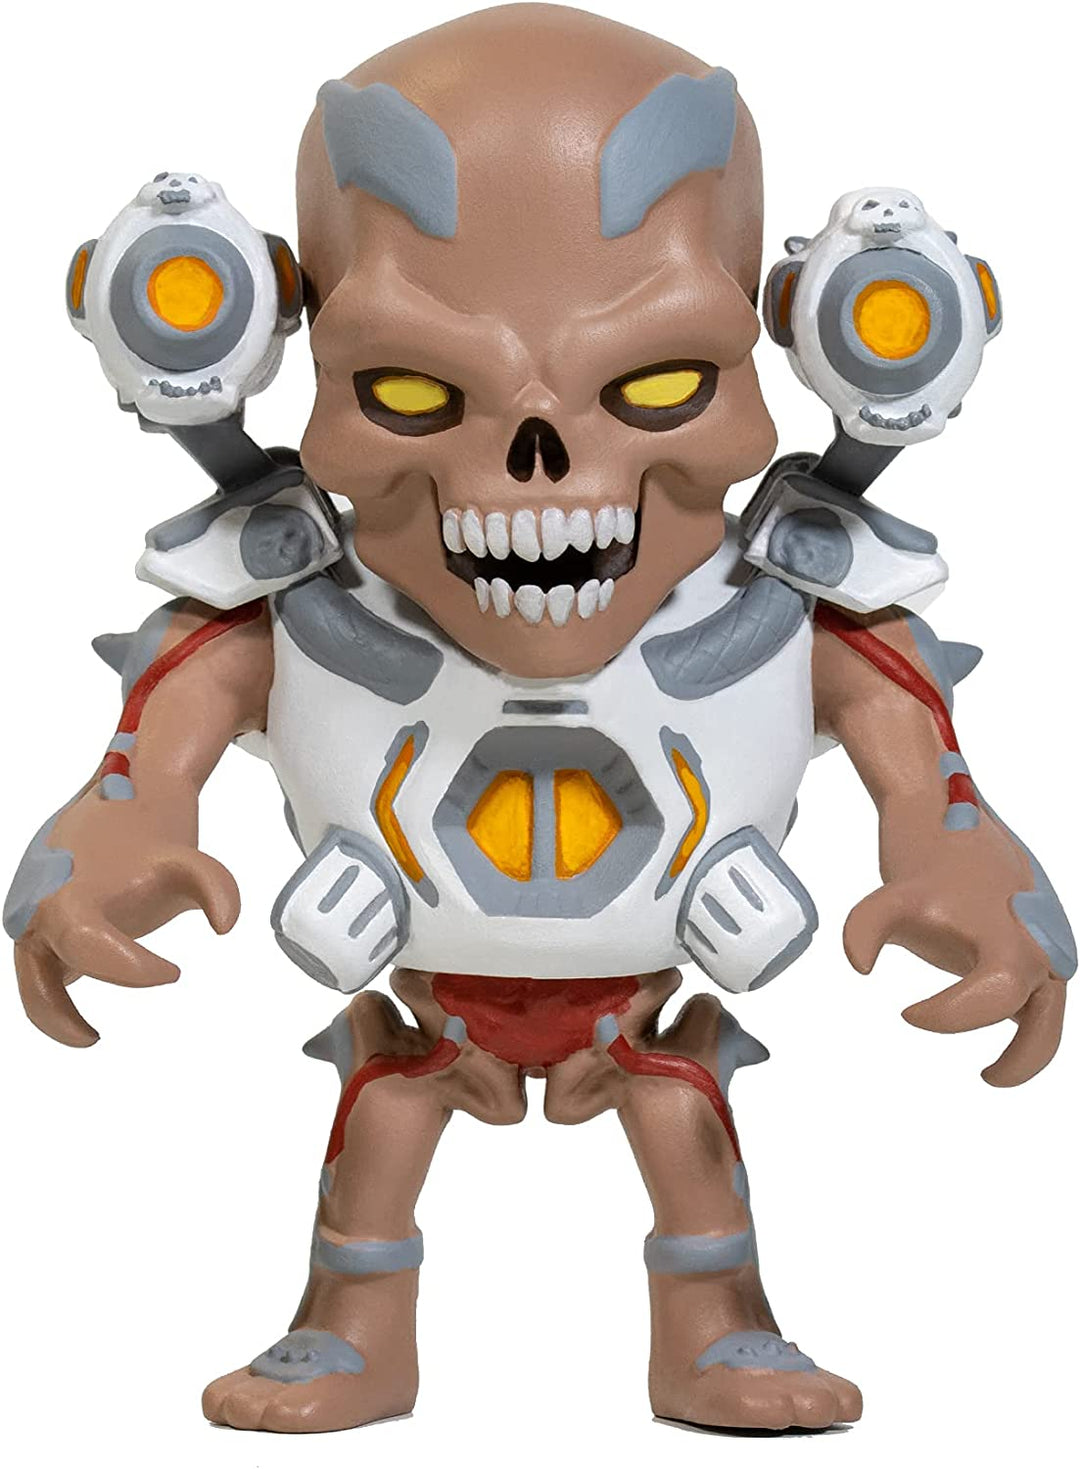 Official DOOM Revenant Collectable Figurine